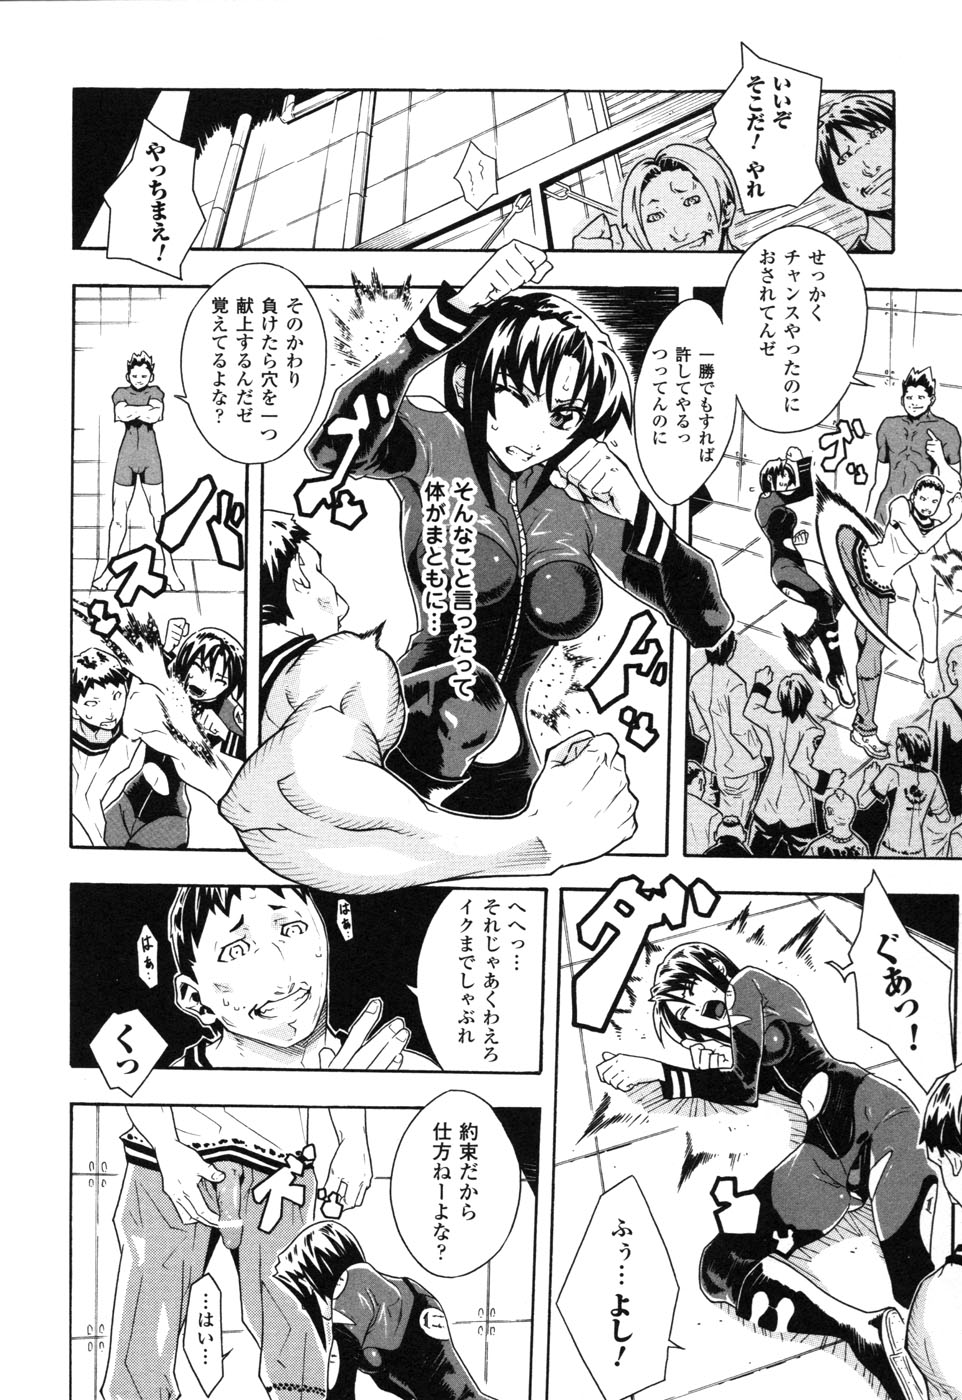 Rider Suit Heroine Anthology Comics 2 page 16 full